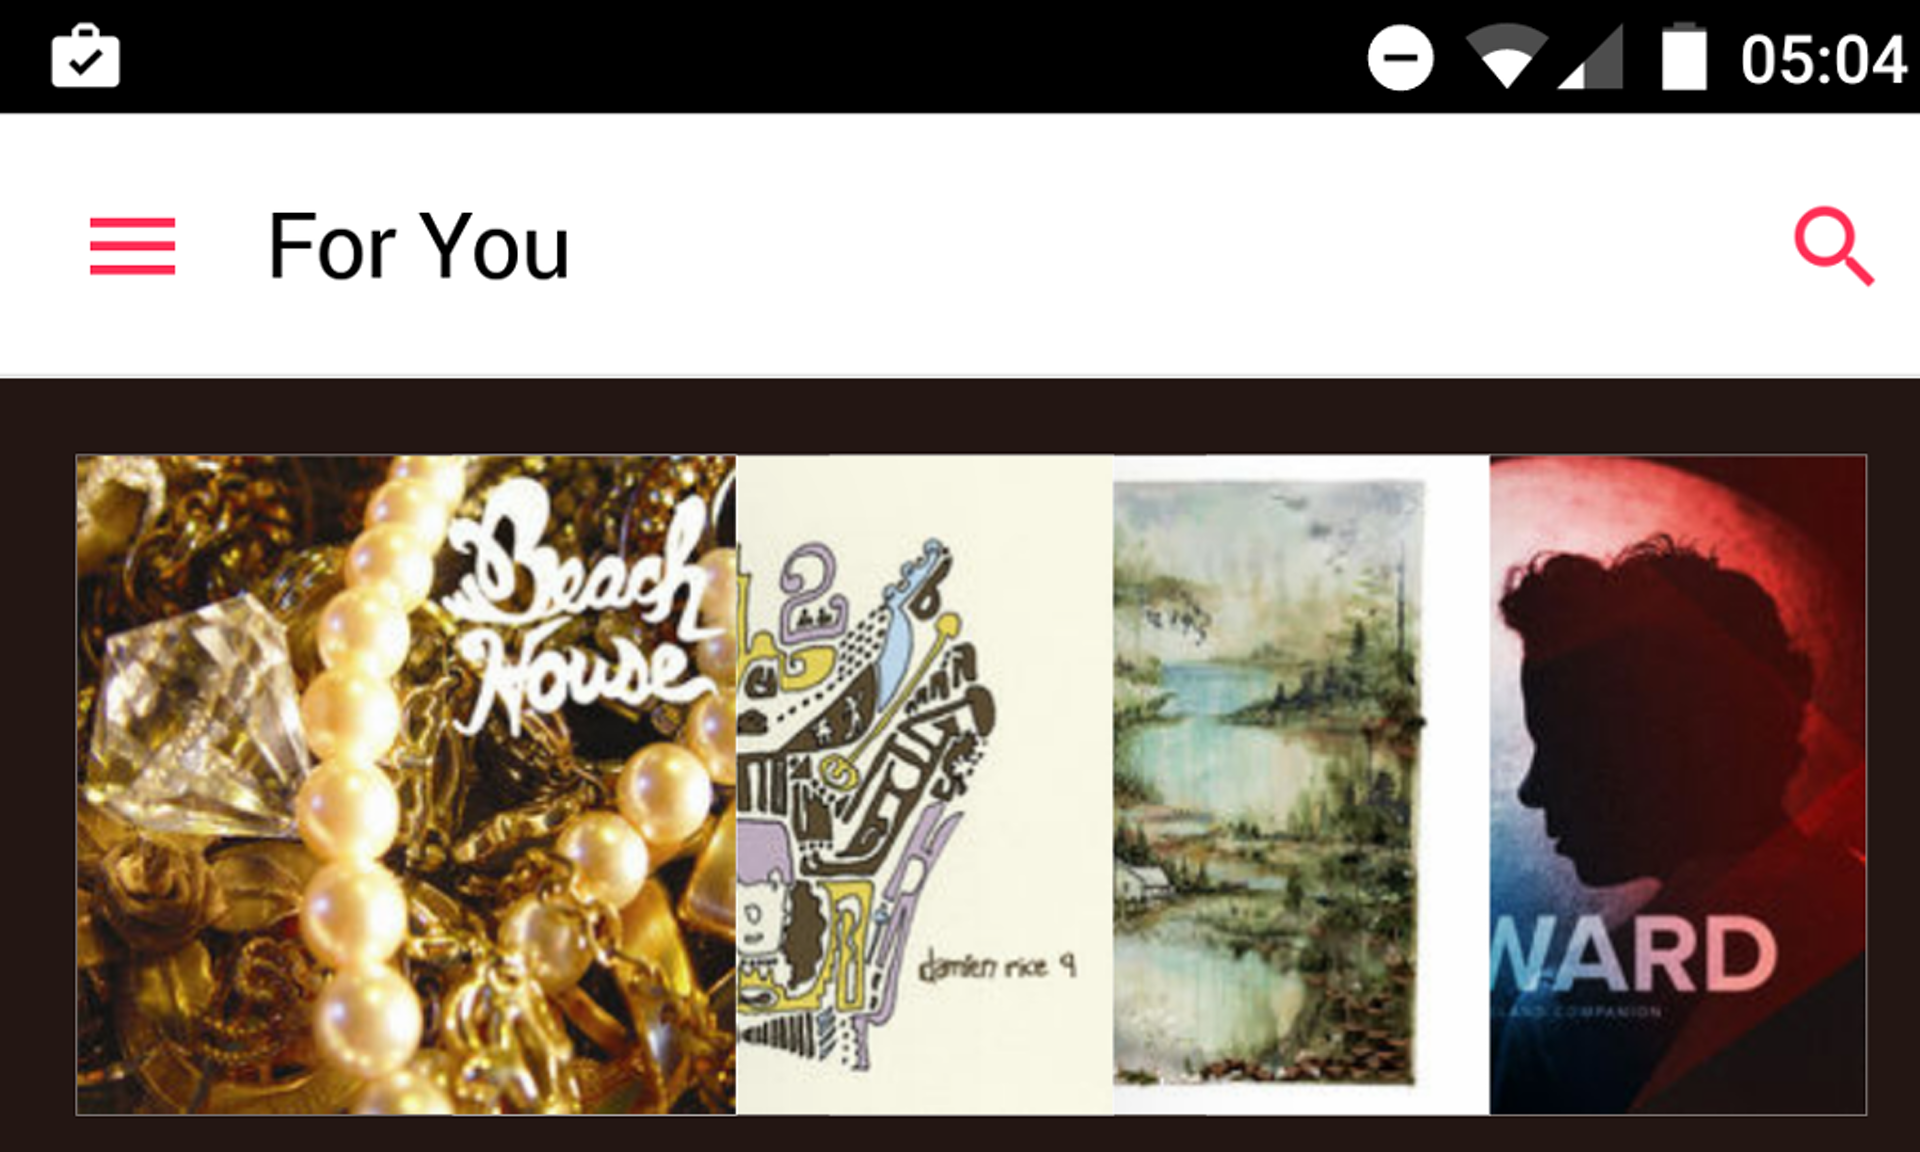 Apple Launches Its First Android App, Apple Music